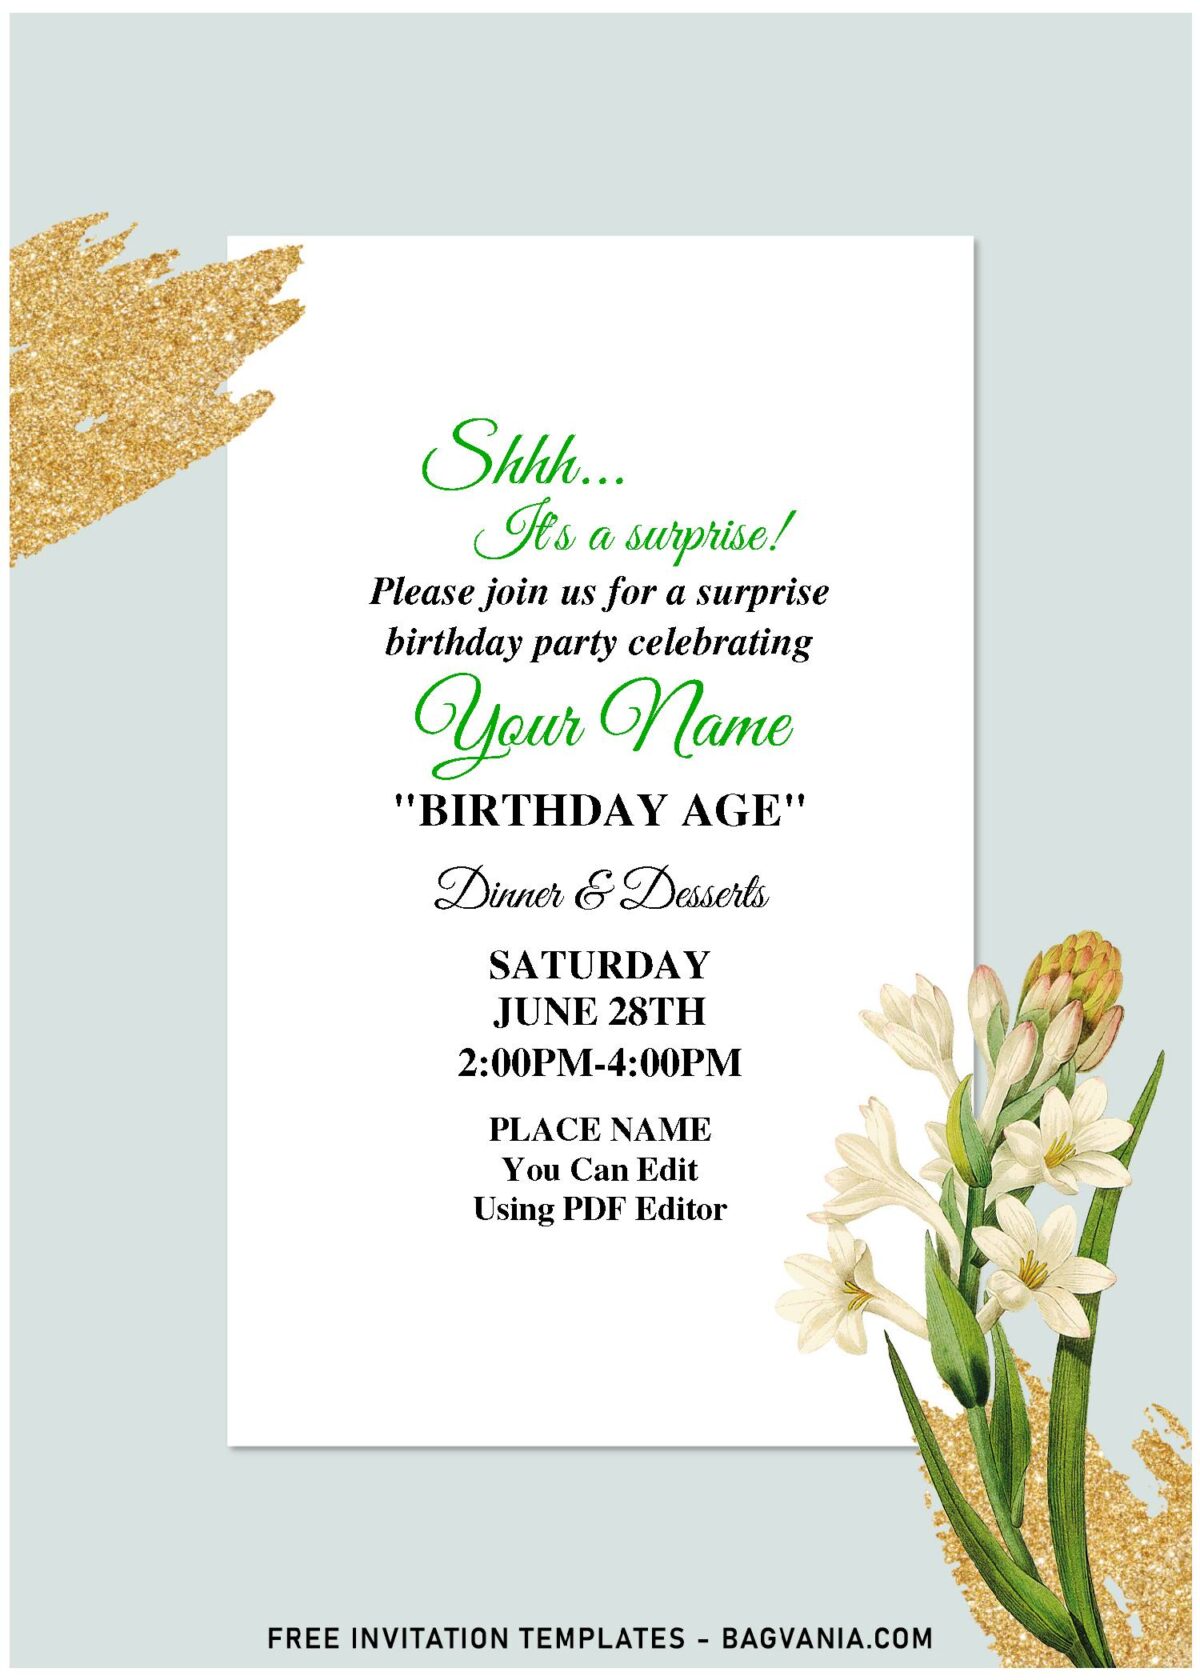 (Free Editable PDF) Glimmering Gold Glitters And Tuberose Floral Invitation Templates with sparkling glitter gold brushstrokes